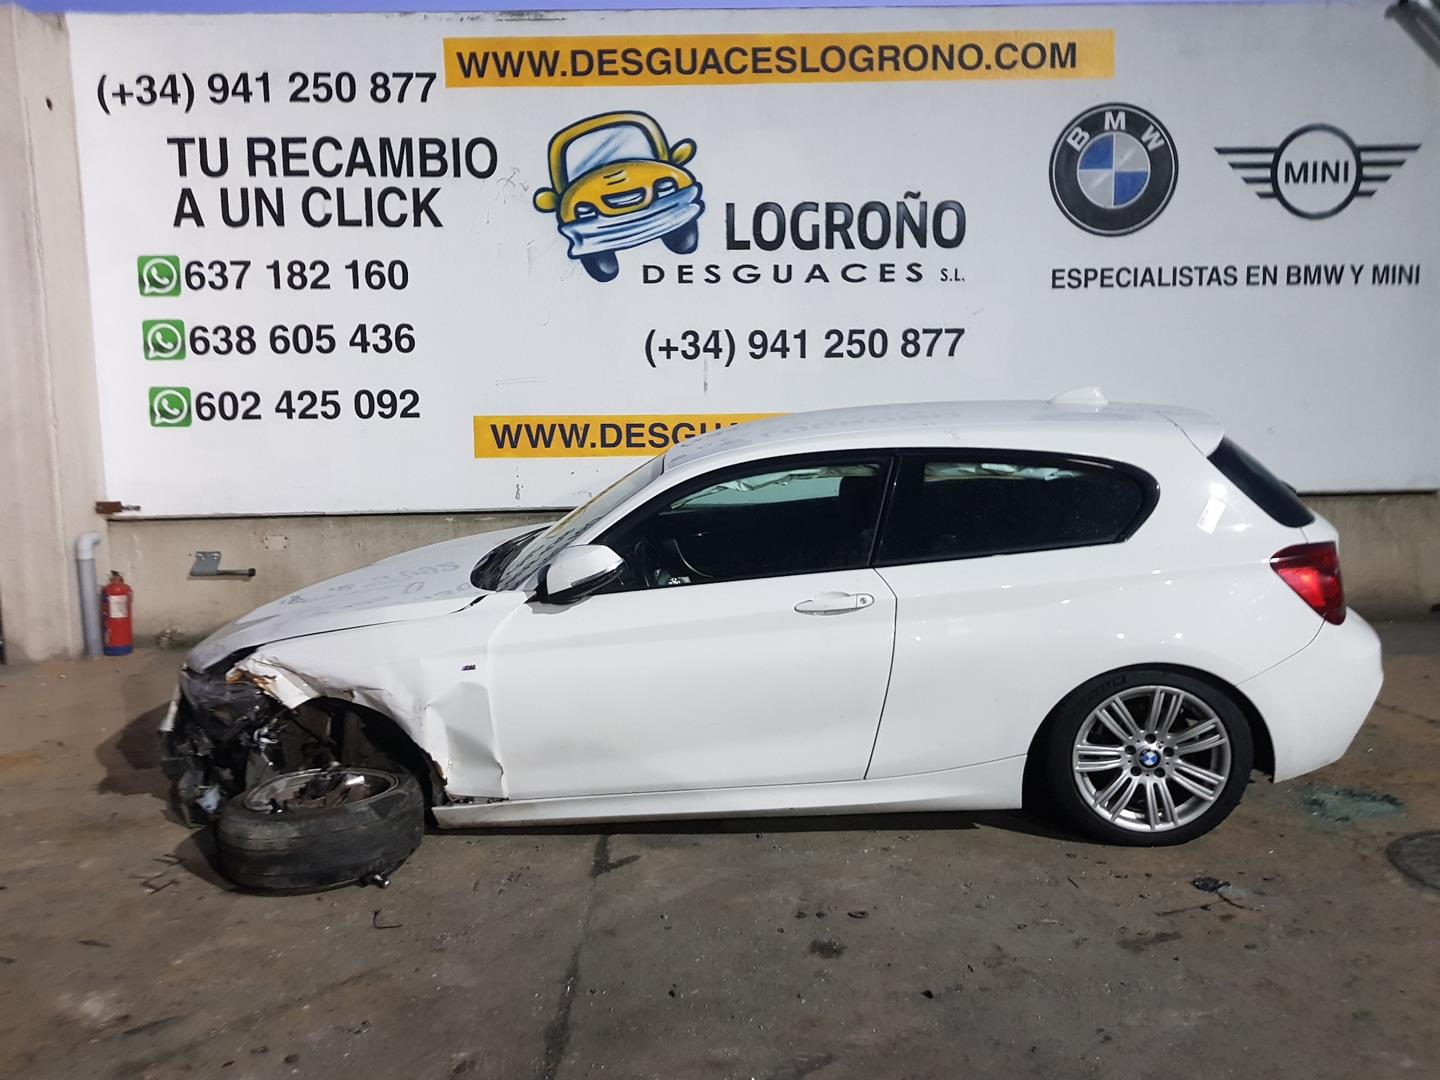 BMW 1 Series F20/F21 (2011-2020) Other Interior Parts 51459205364, 64229205356 19898156